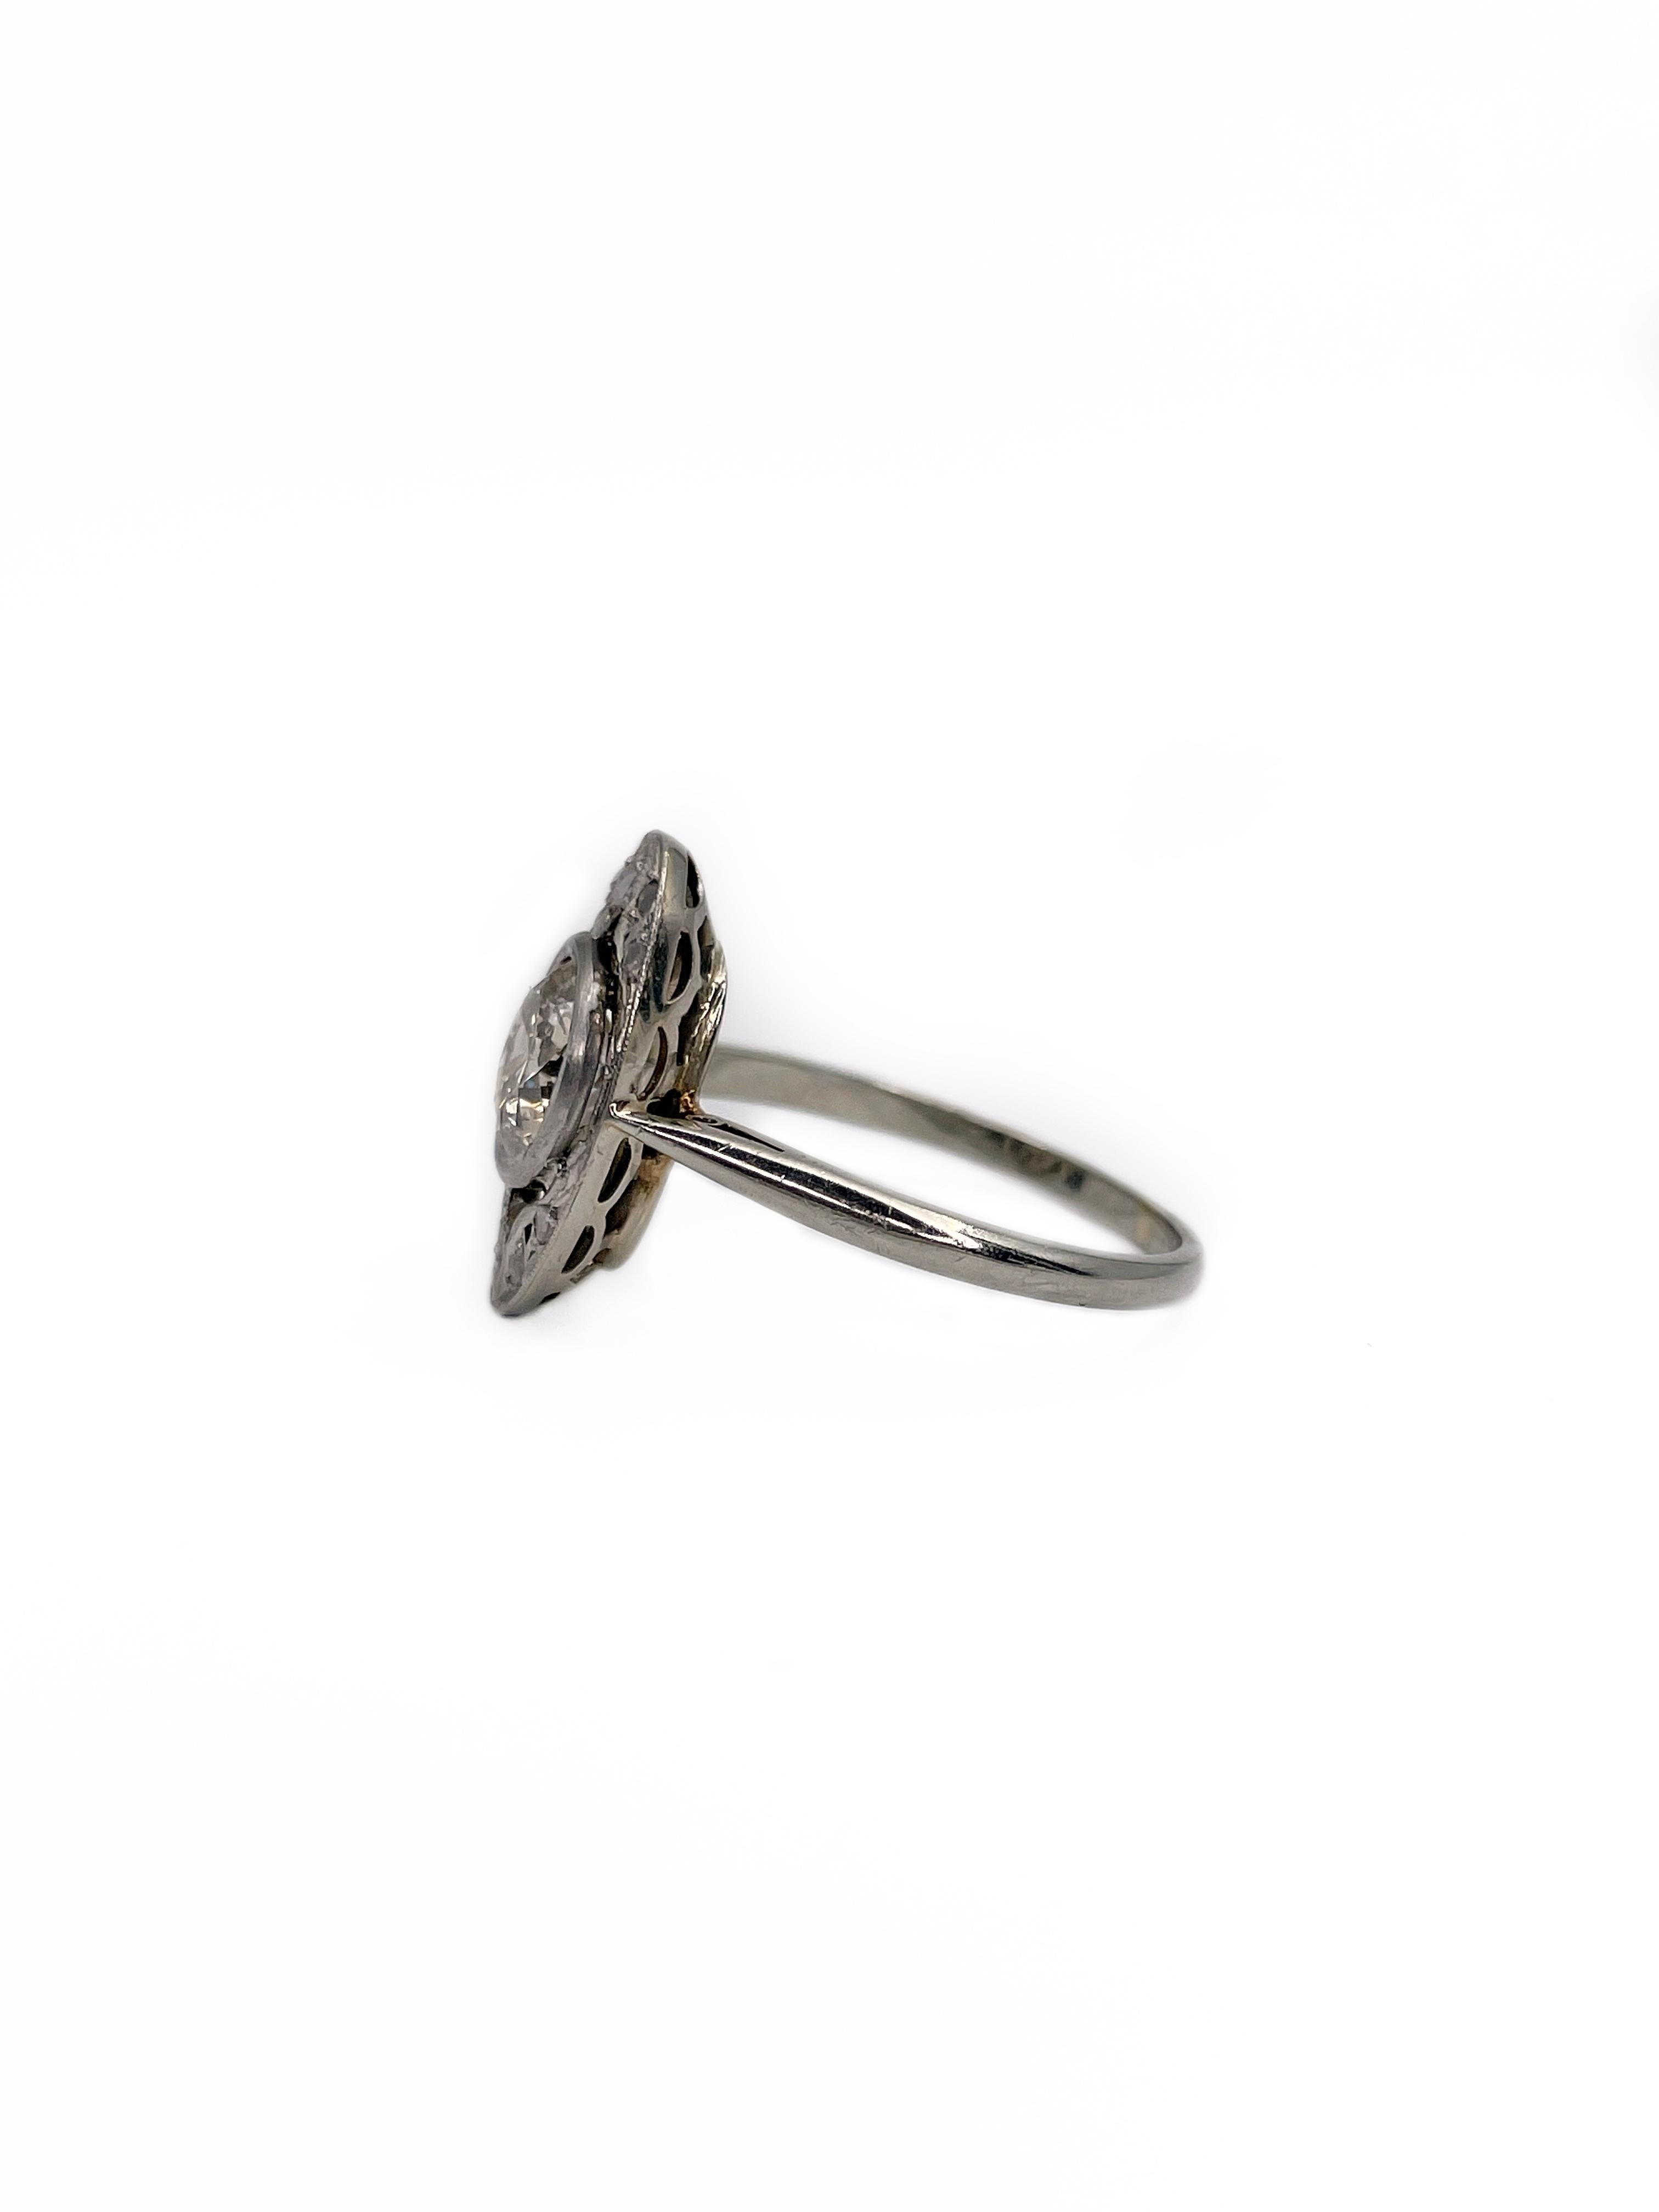 This is a typical Art Deco period oval ring crafted in 950 hallmark platinum. The head itself is strengthened with metal. Central stone is 1.00ct old brilliant cut diamond, which colour is Tinted and clarity - P2. It is accompanied with 6 rose cut